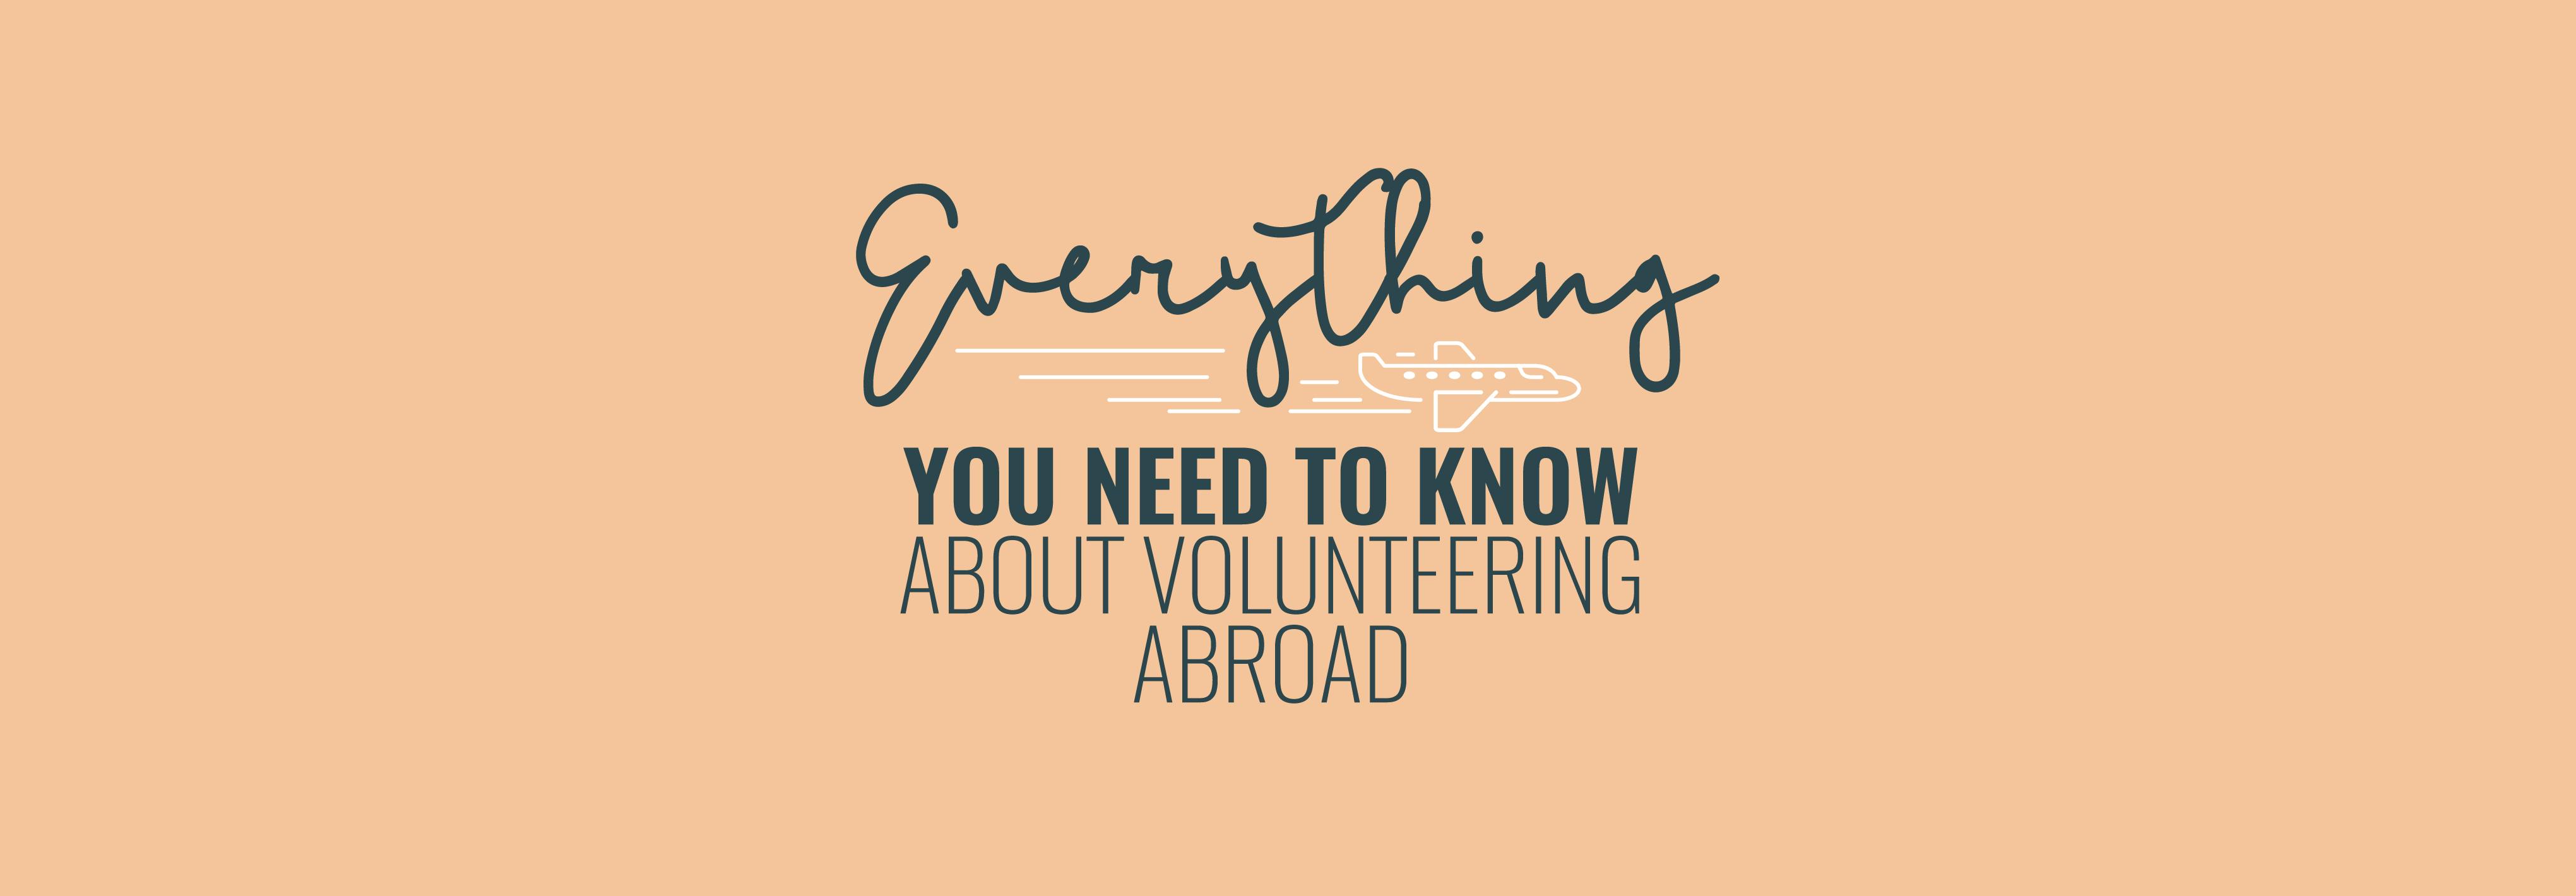 Find out everything you need to know about volunteering abroad